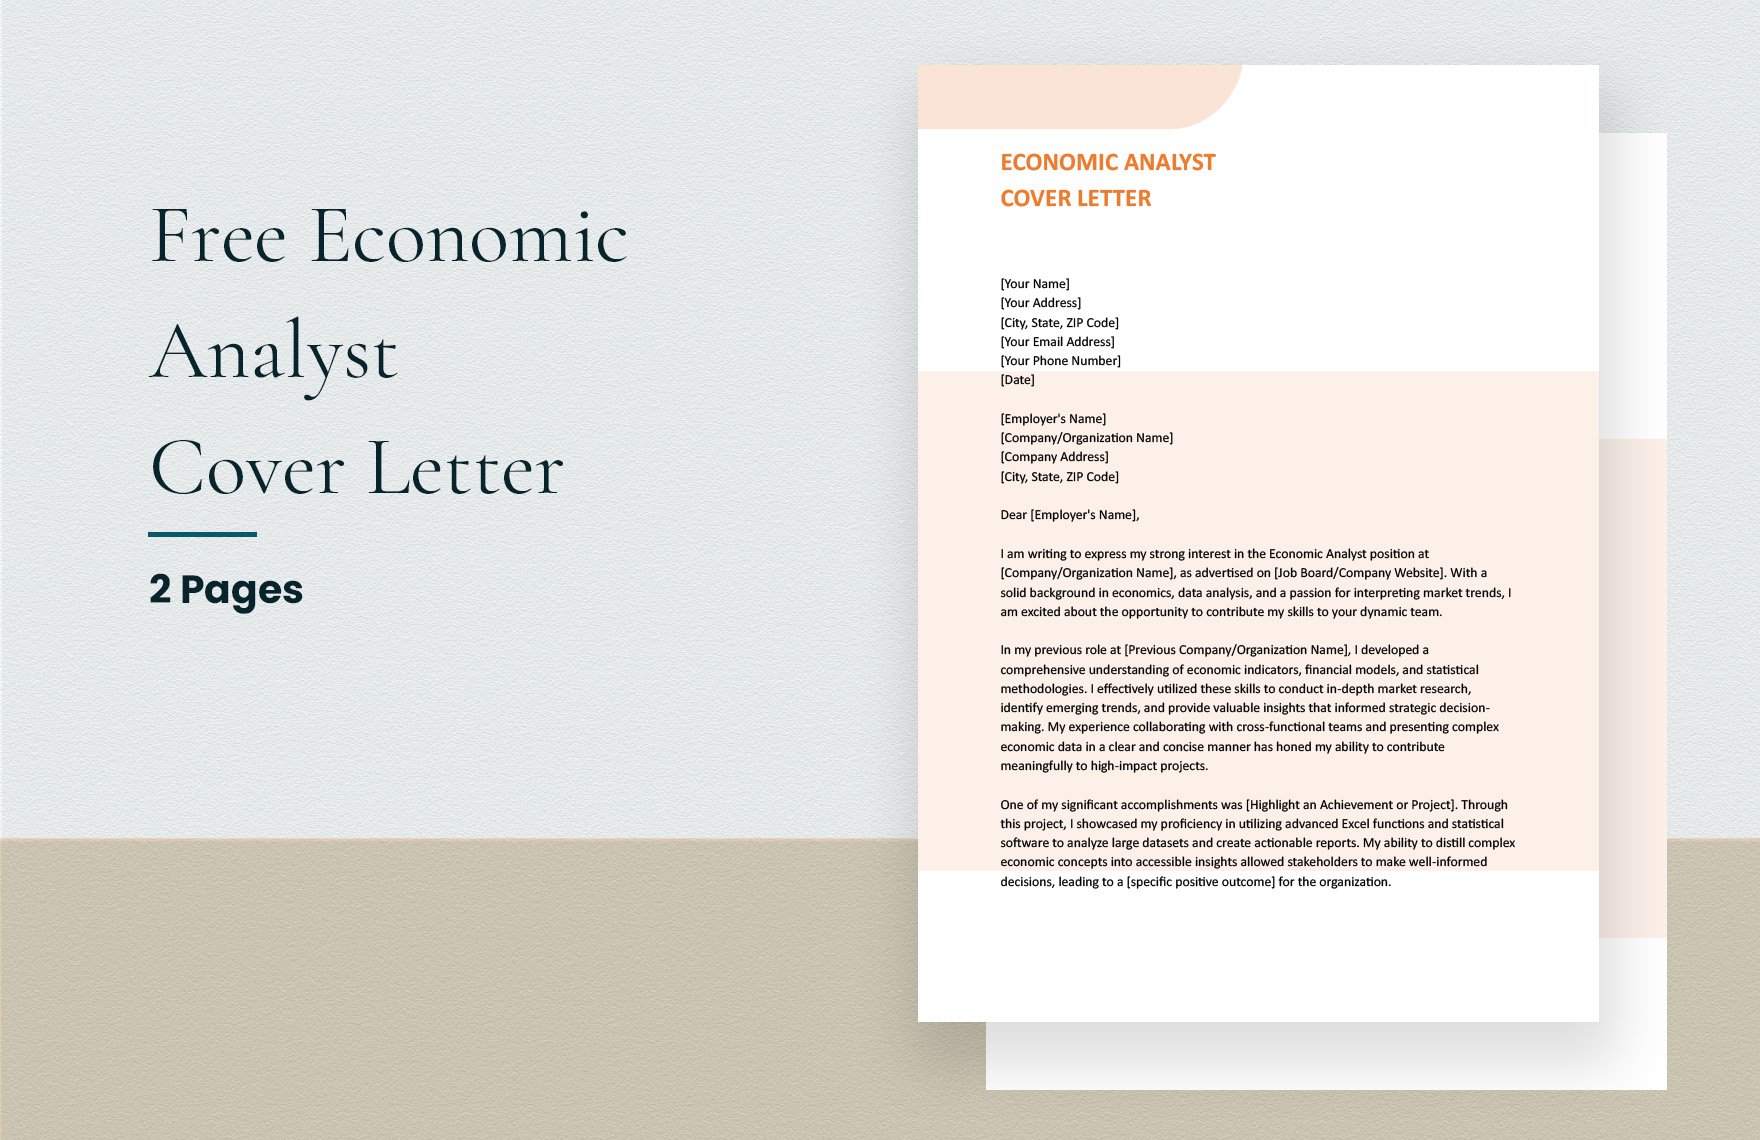 Economic Analyst Cover Letter